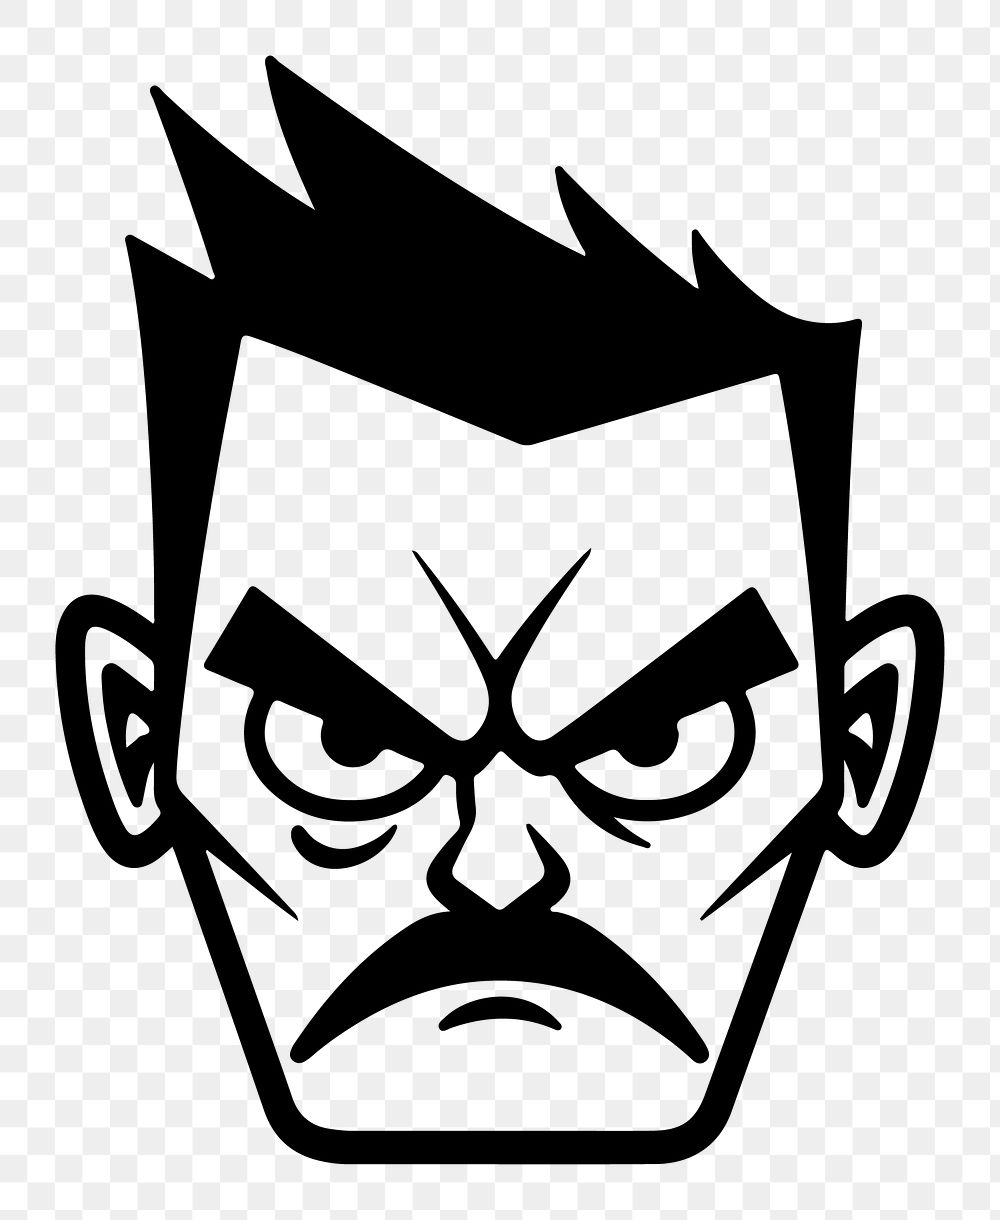 Angry man png character line art, transparent background